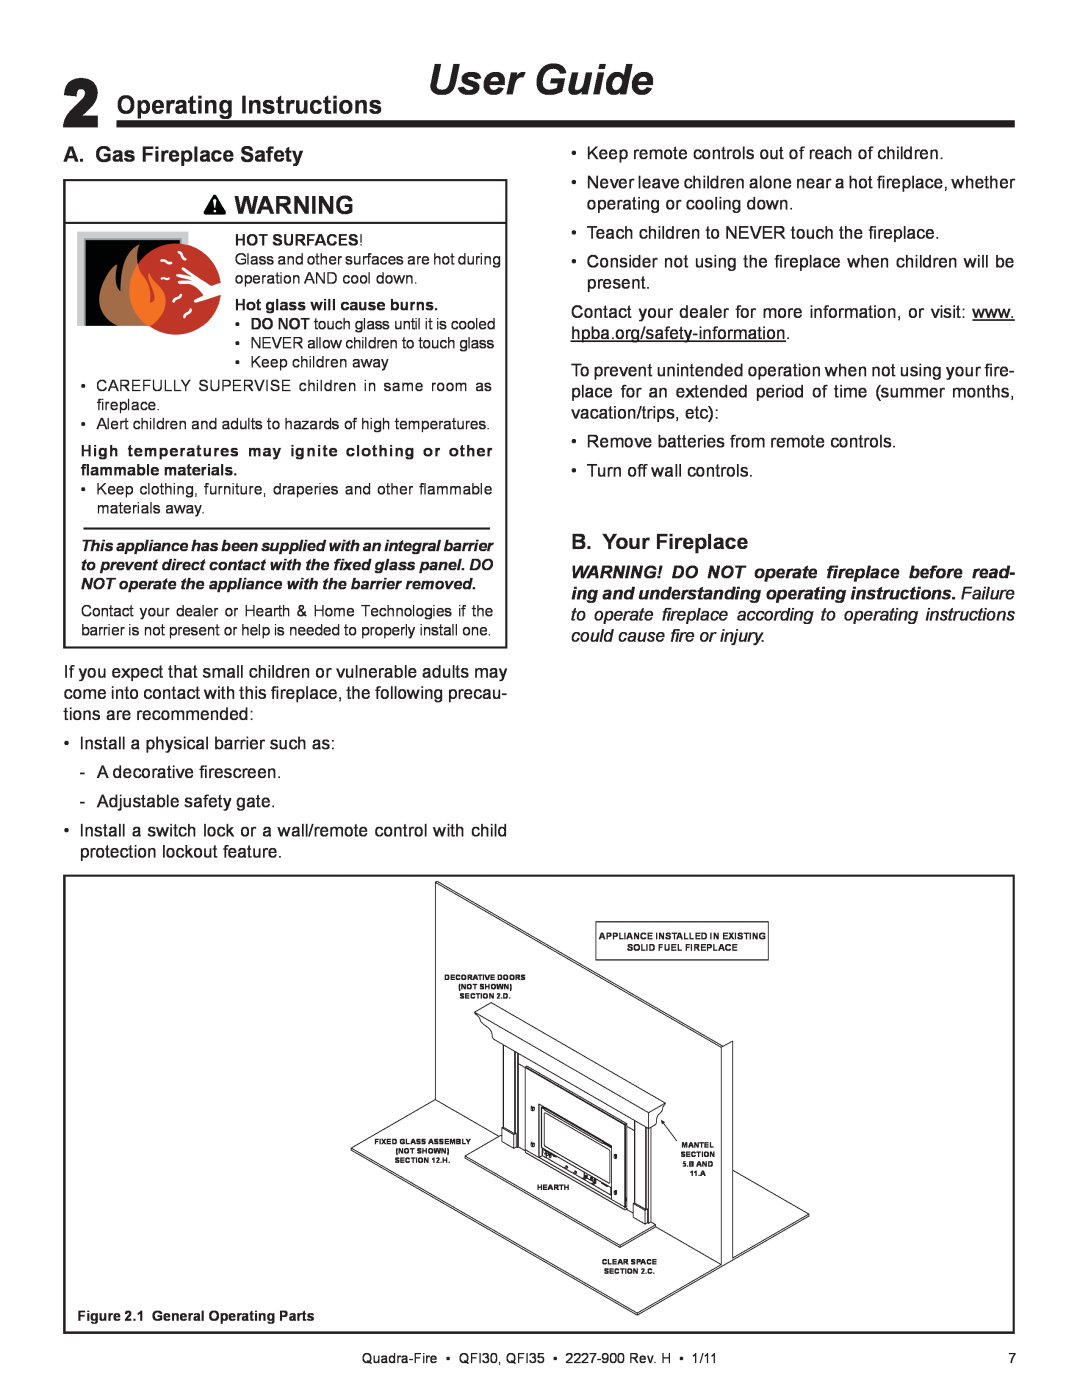 Quadra-Fire QF130 owner manual Operating Instructions User Guide, A. Gas Fireplace Safety, B. Your Fireplace 